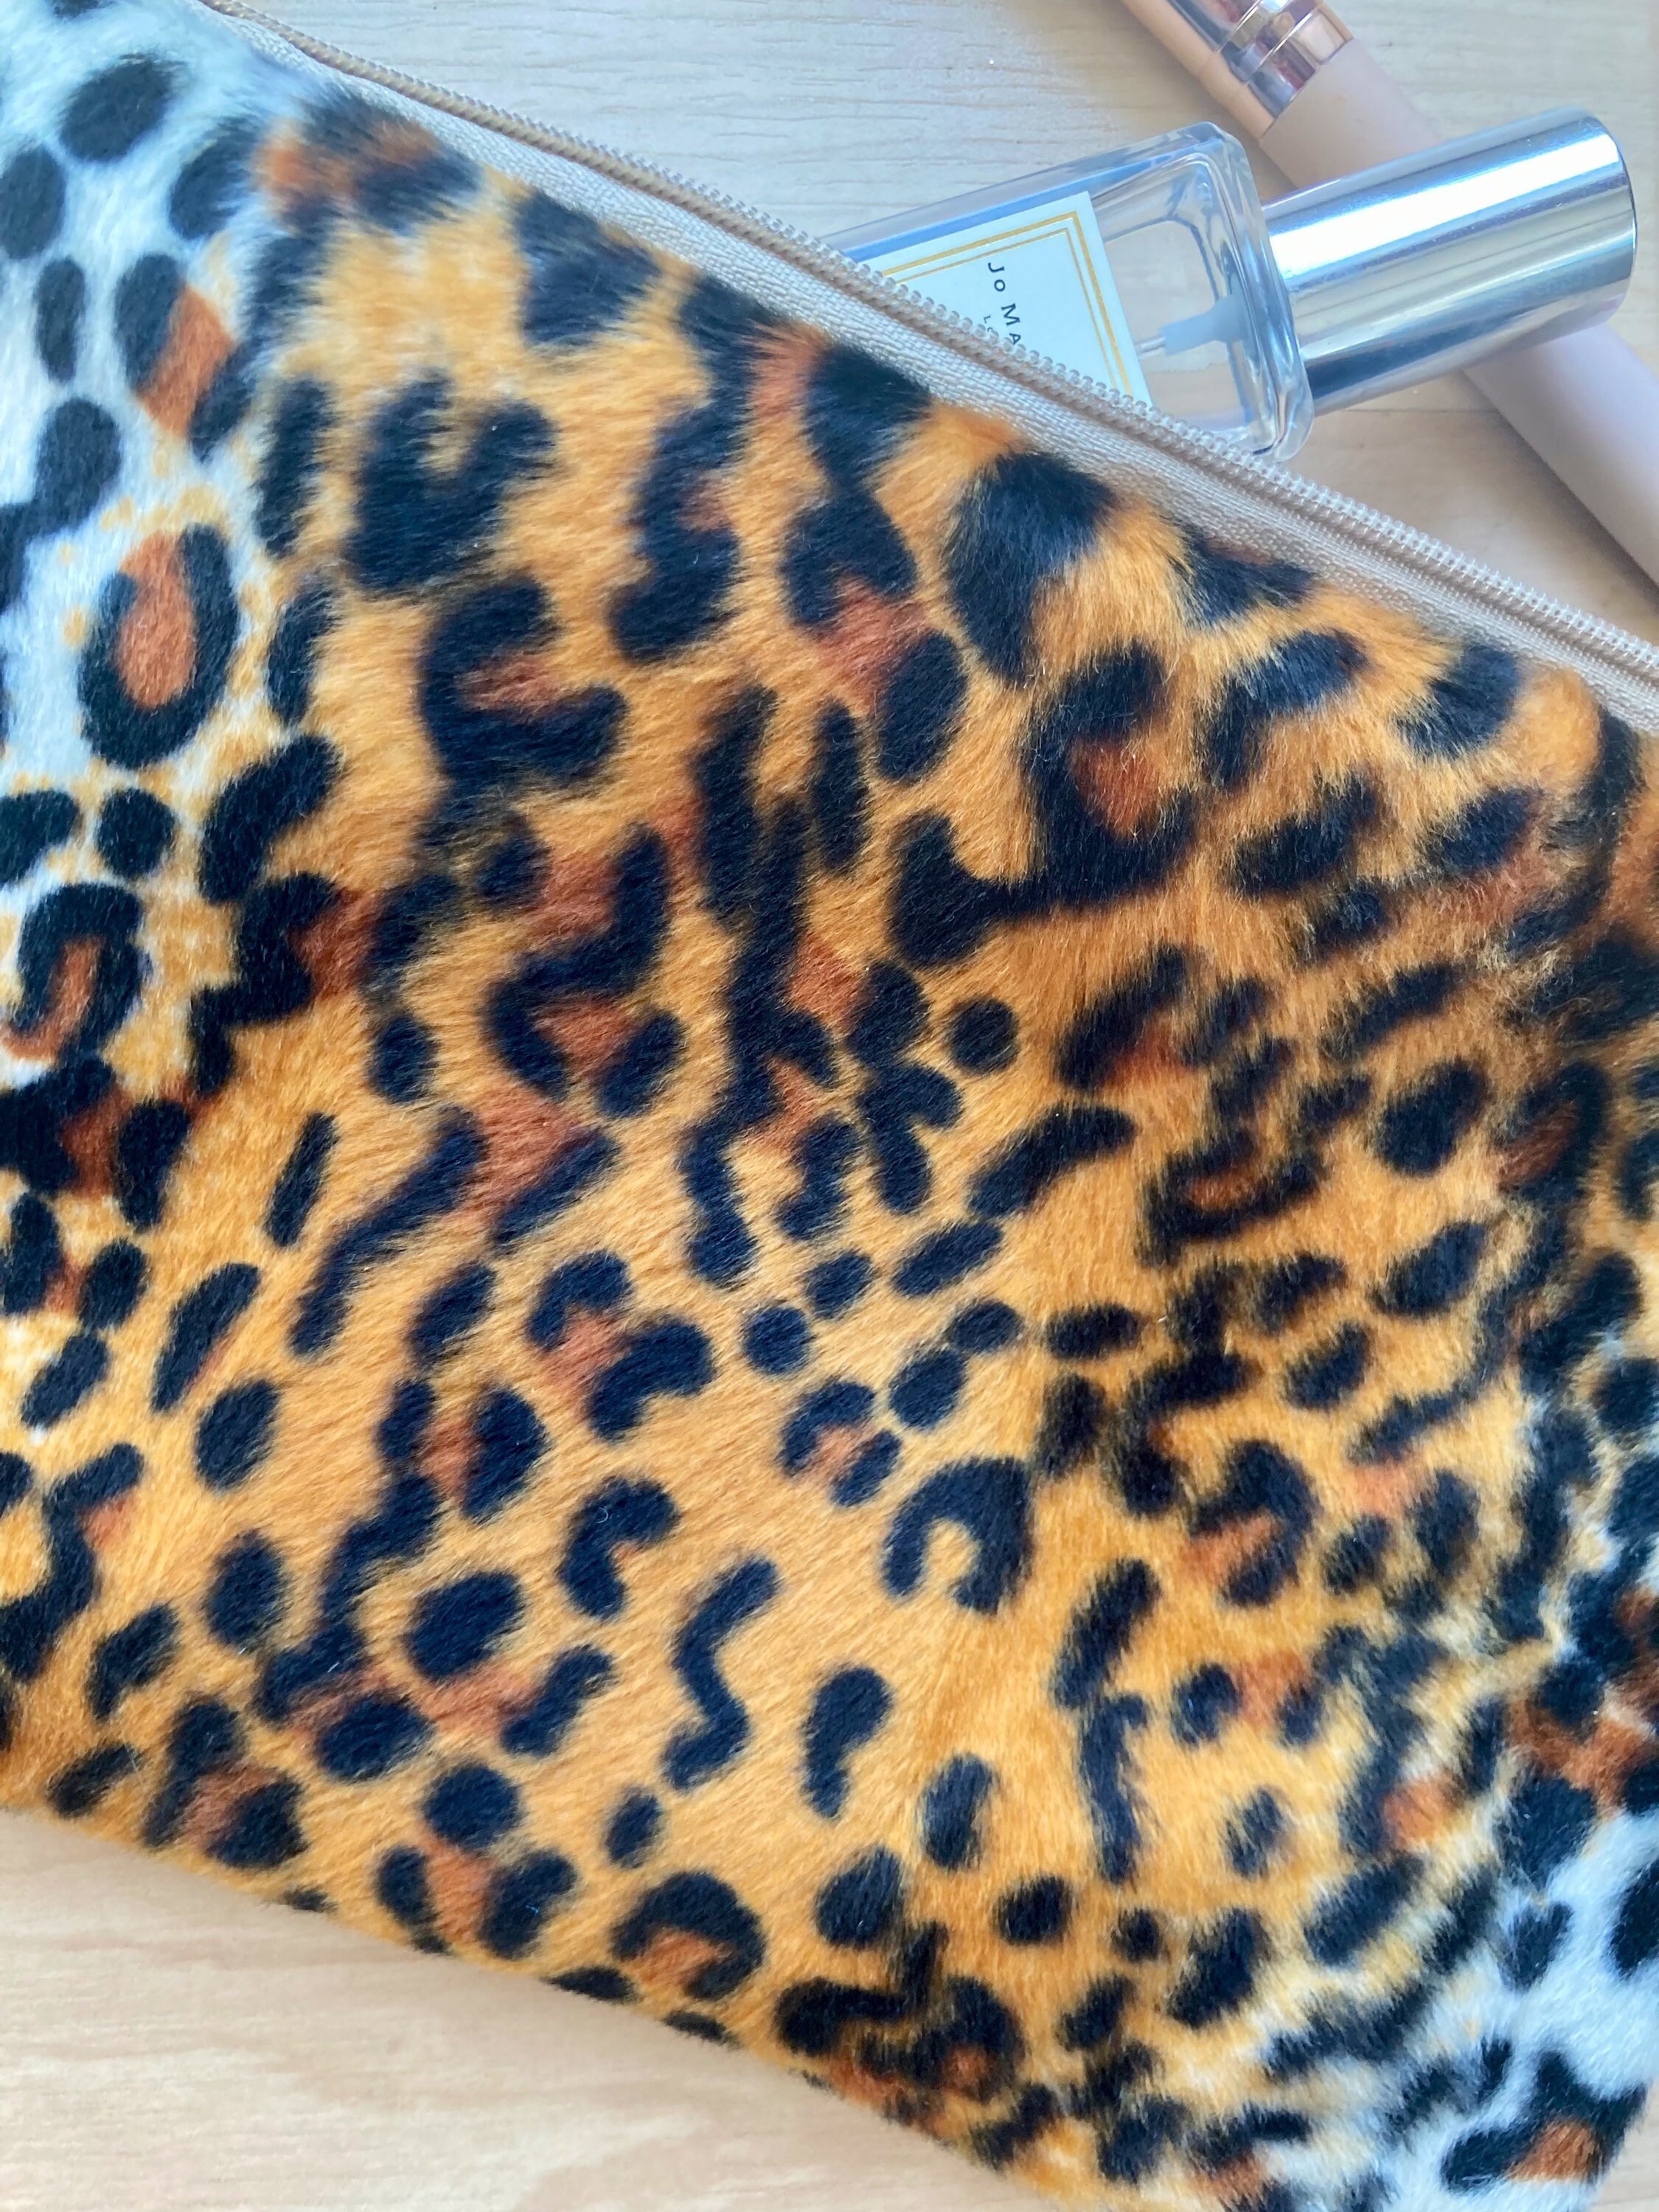 FF Leopard Cosmetic Bag (Authentic Pre-Owned)